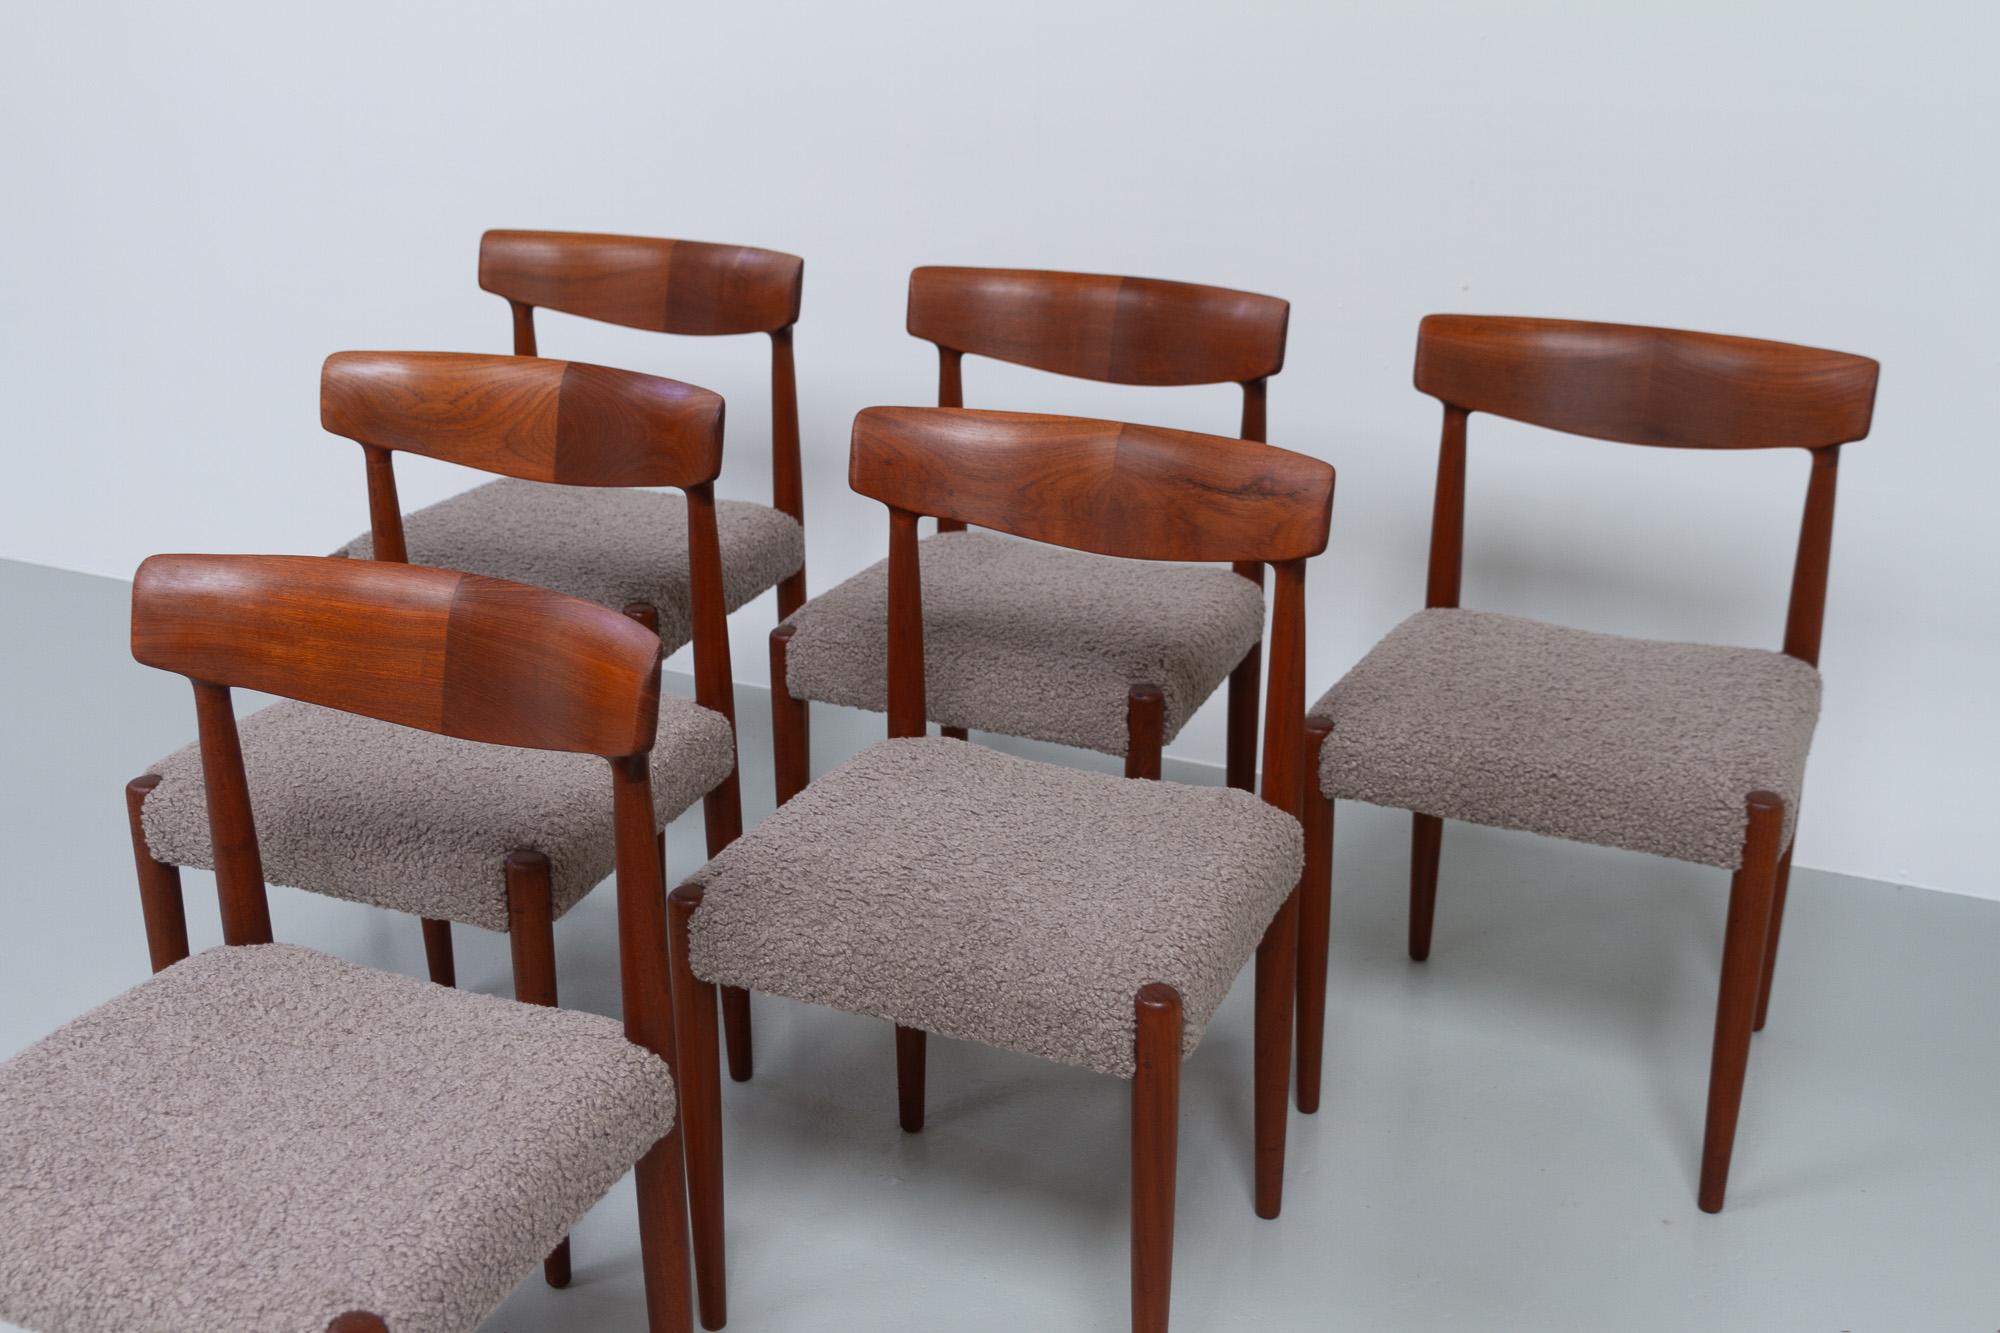 Danish Modern Teak Dining Chairs by Knud Færch for Slagelse, 1960s. Set of 6. For Sale 2